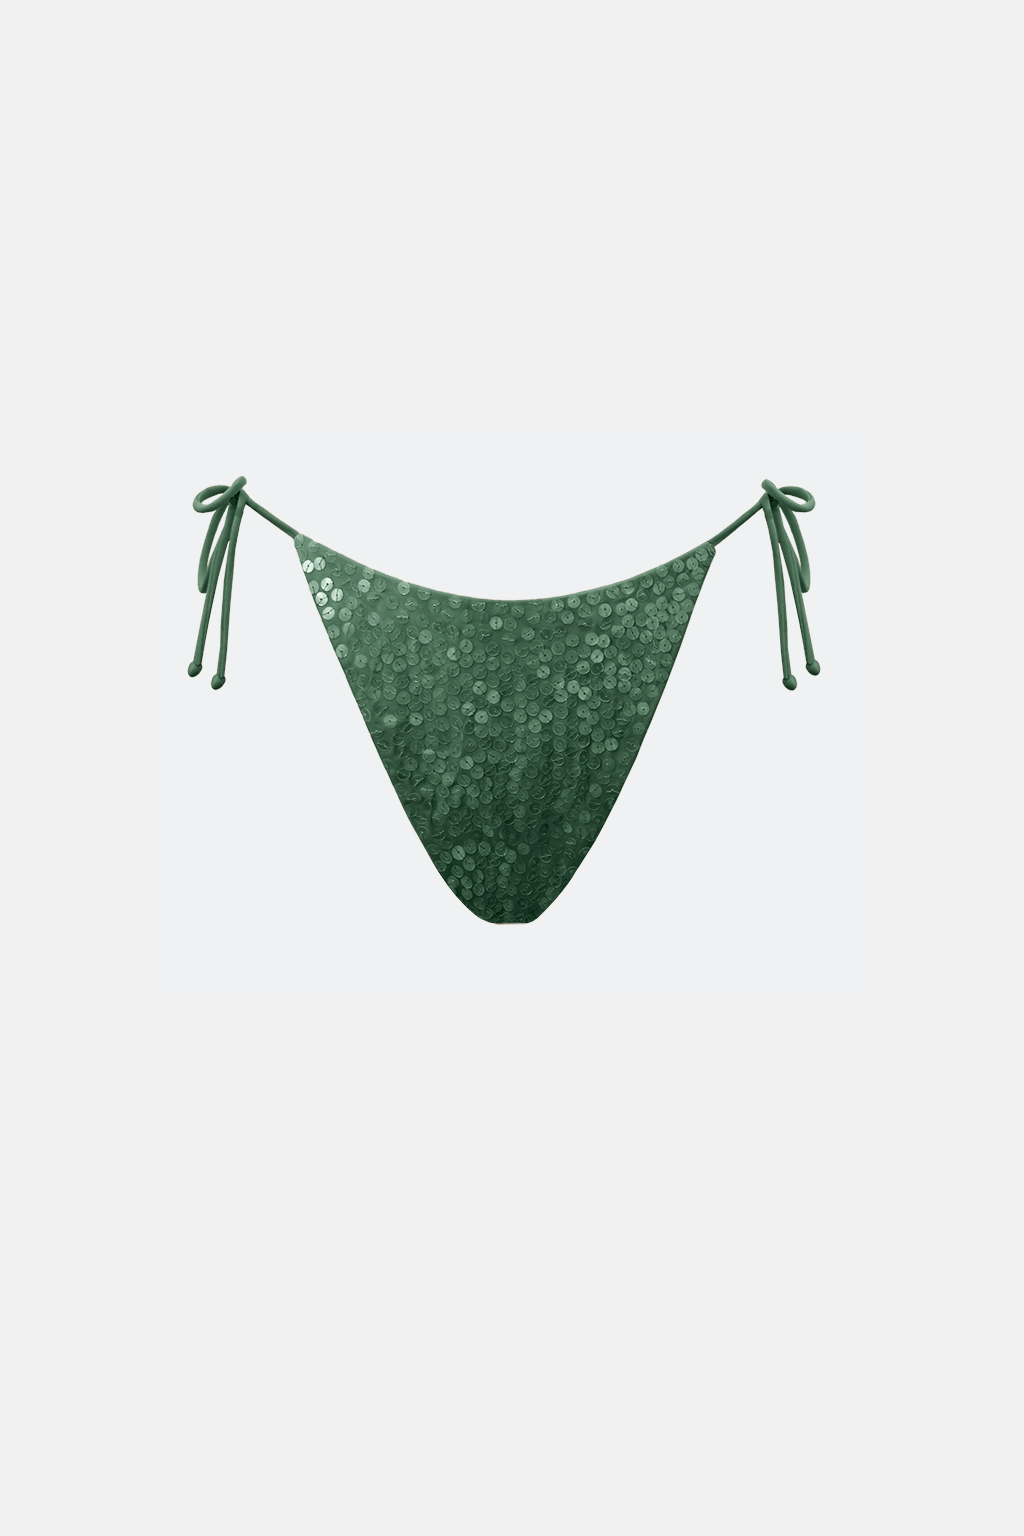 AGAVE GREEN STRING BIKINI BOTTOM WITH HAND EMBROIDERED CLEAR 100% RECYCLED SEQUINS SUSTAINABLE BATHING SUIT BOTTOM LUXURY DESIGNER SWIMWEAR